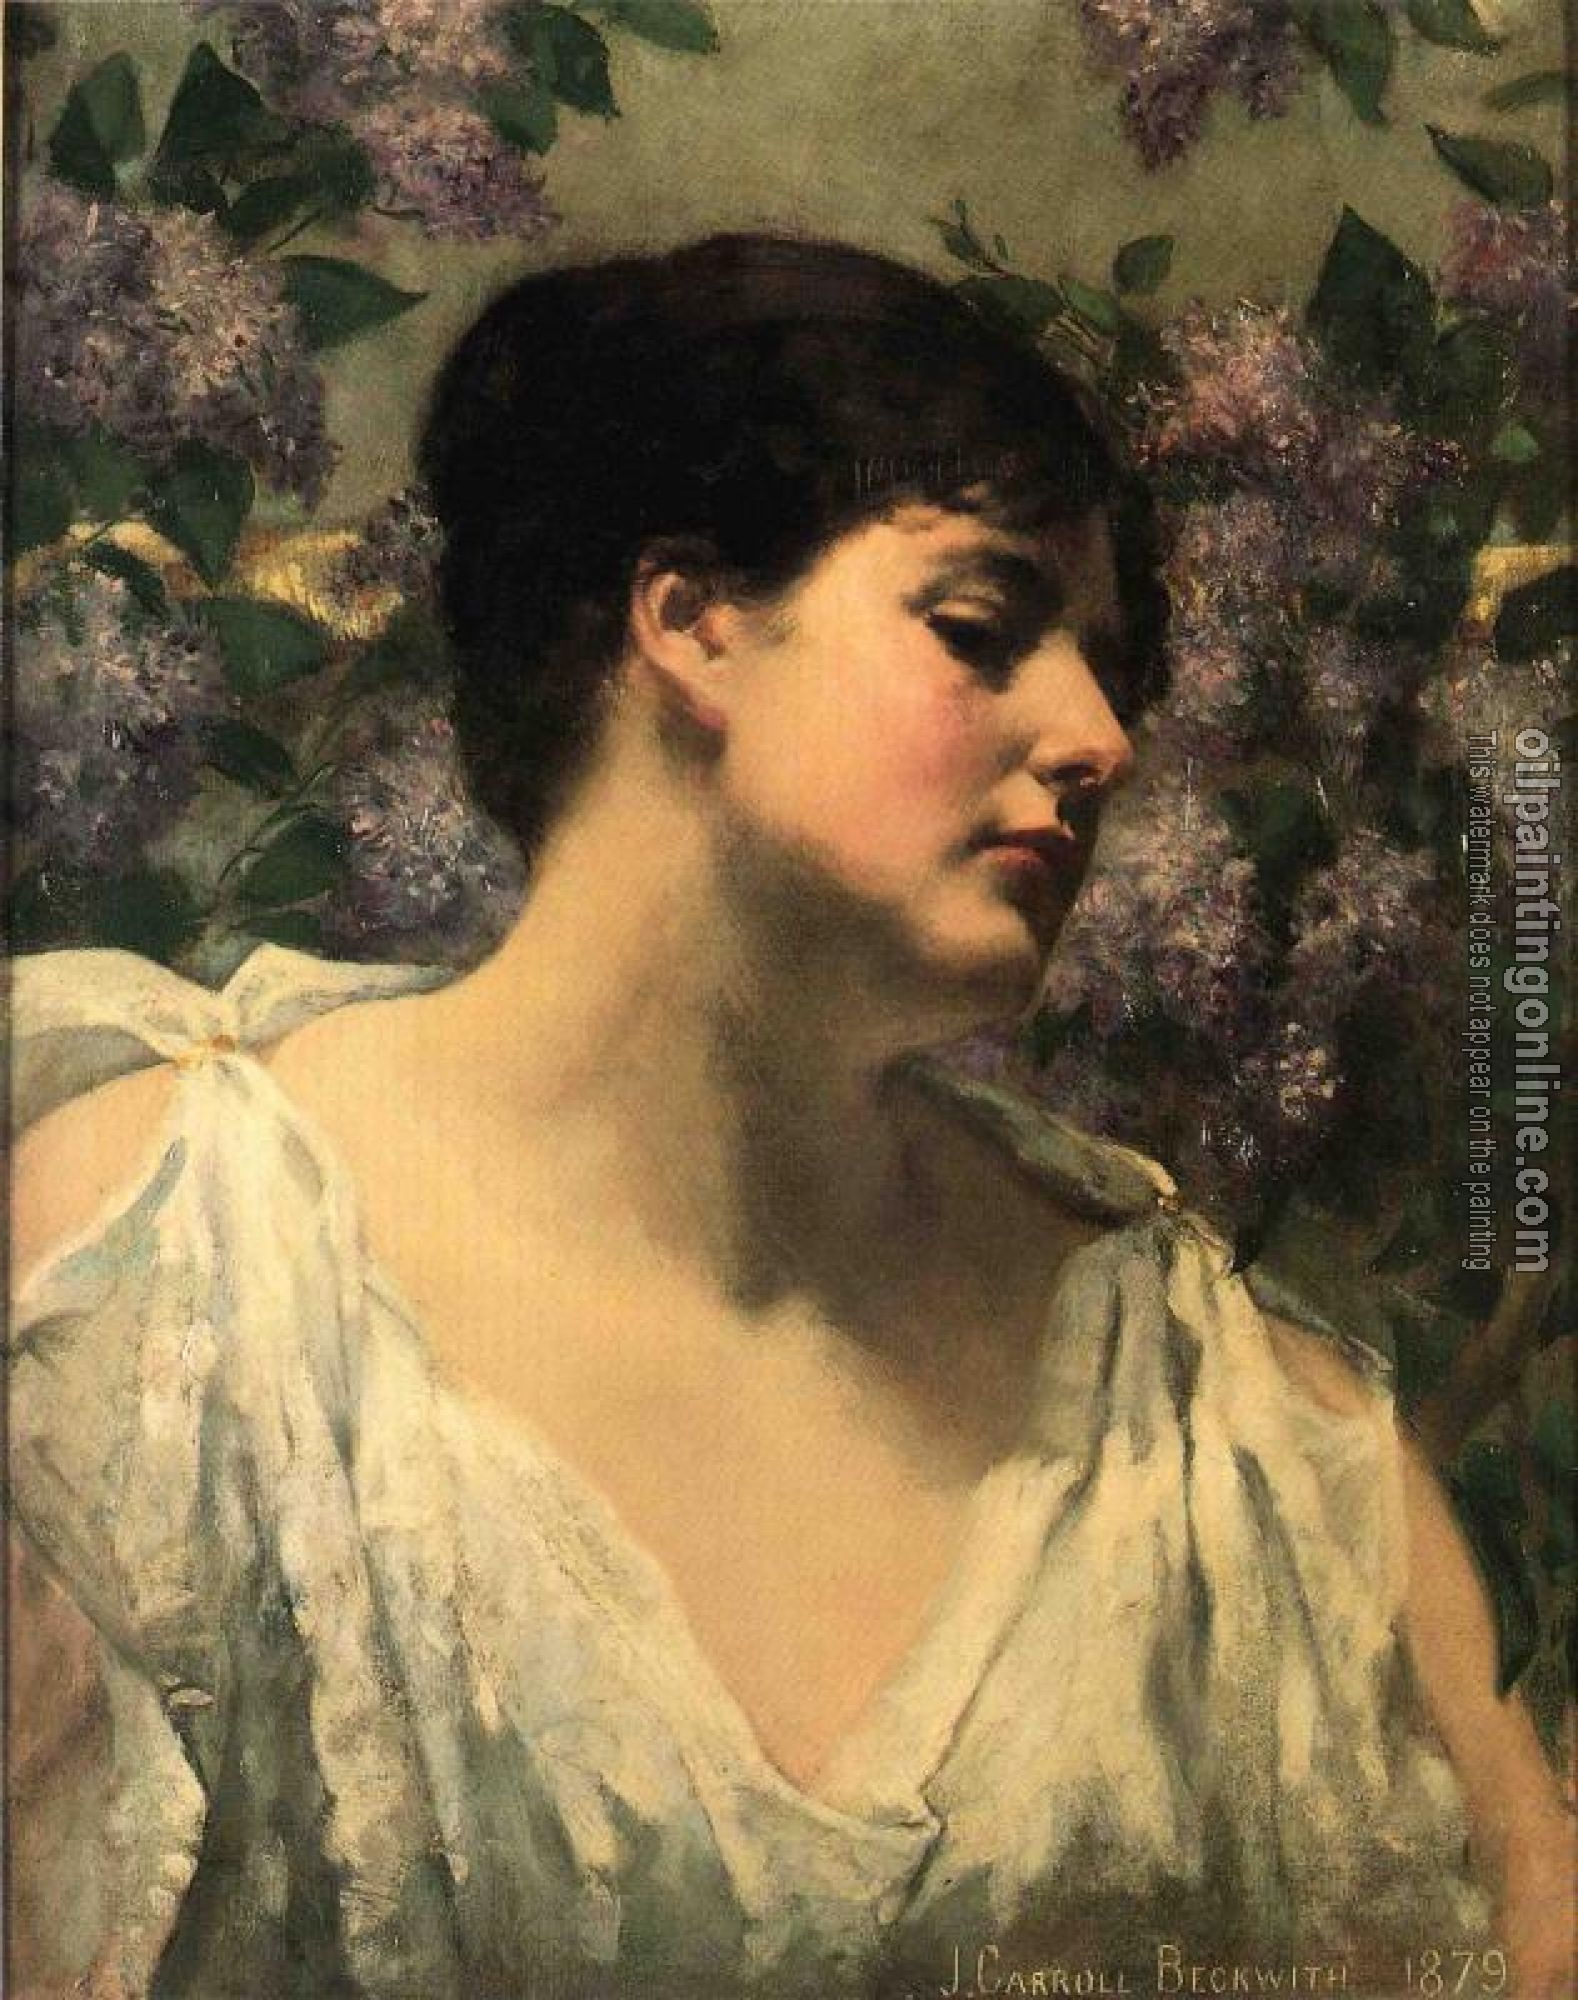 Beckwith, James Carroll - Under the Lilacs